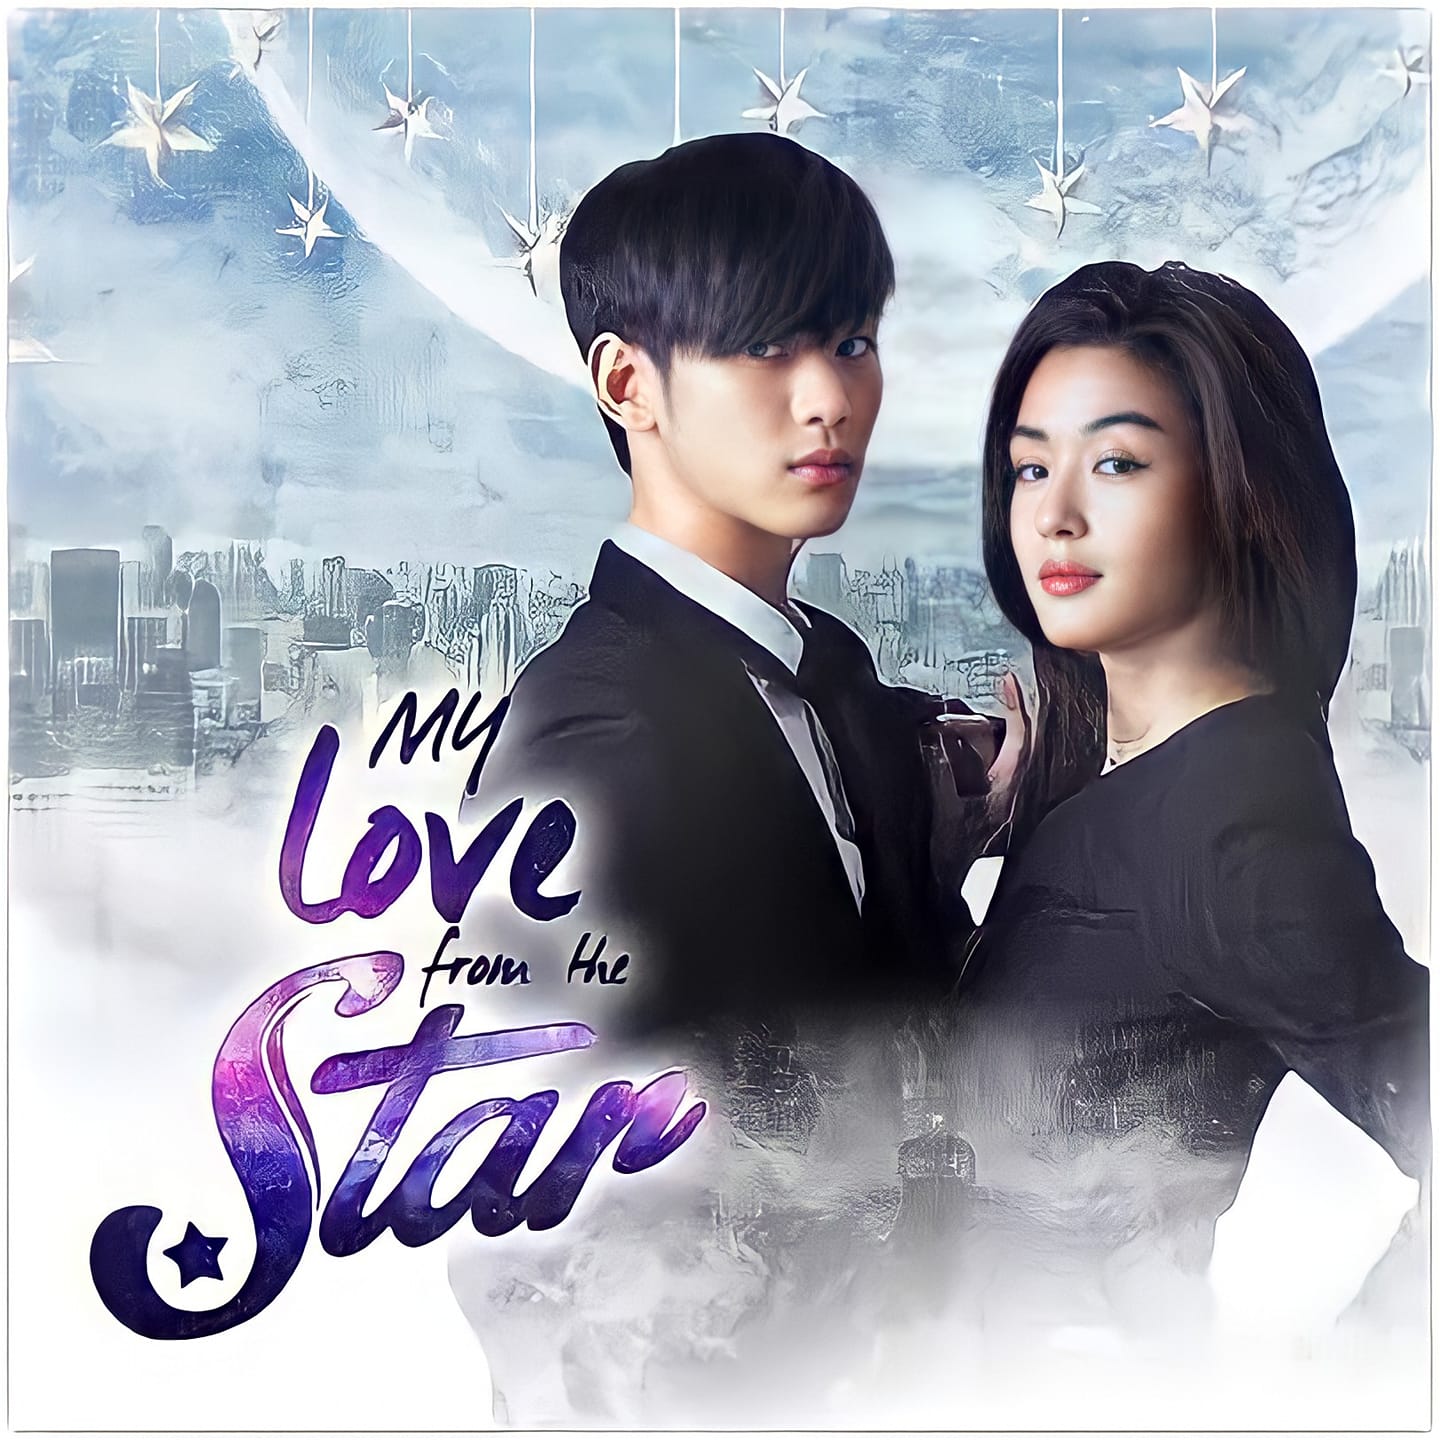 love-fantasy-genre-k-dramas?-then-you-don’t-wanna’-miss-this!